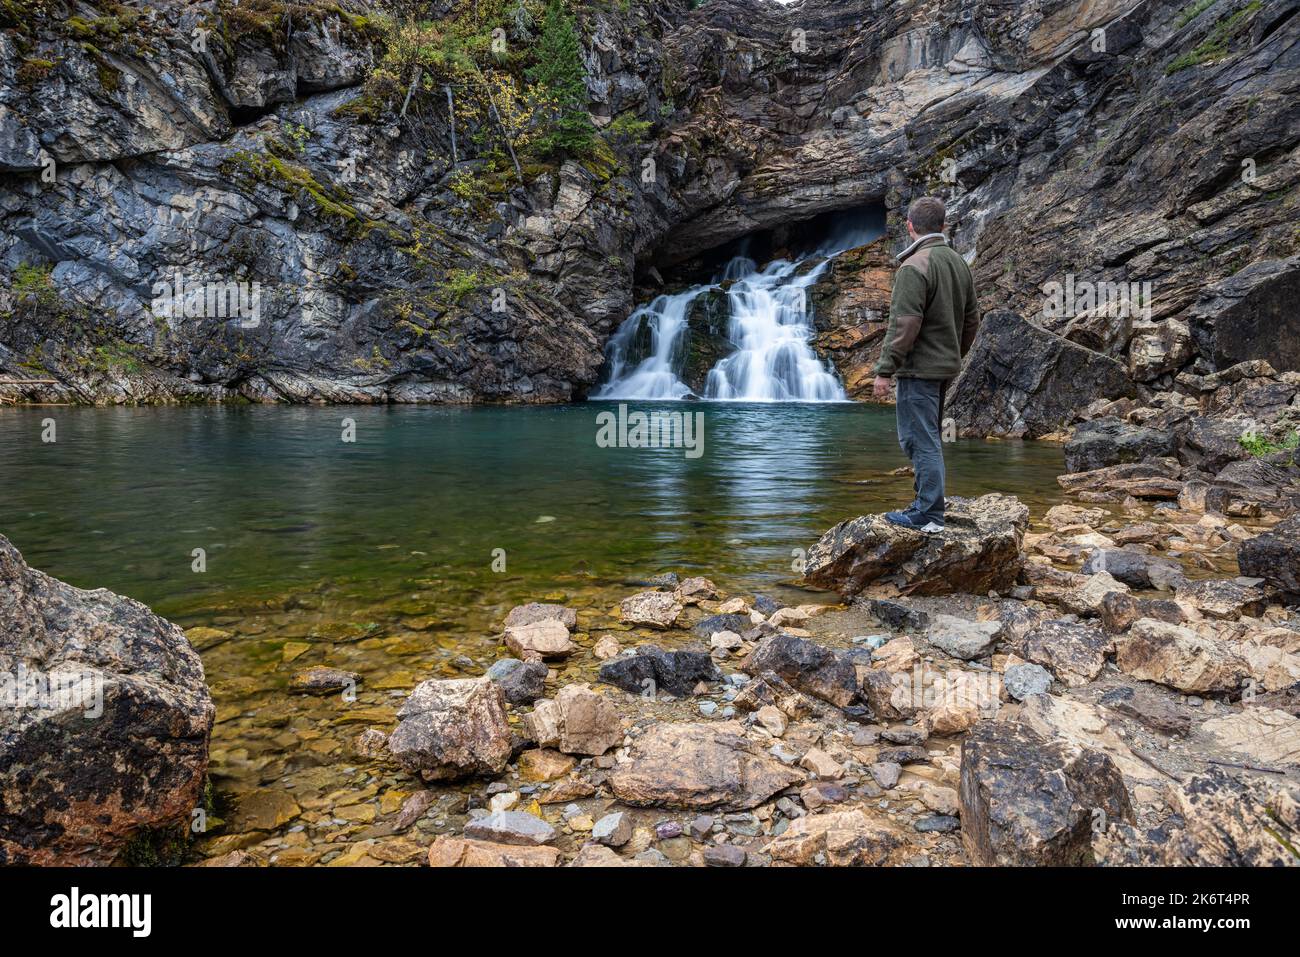 Man standing on the rocks viewing Running Eagle Falls in the Two Medicine section of Glacier National Park Stock Photo